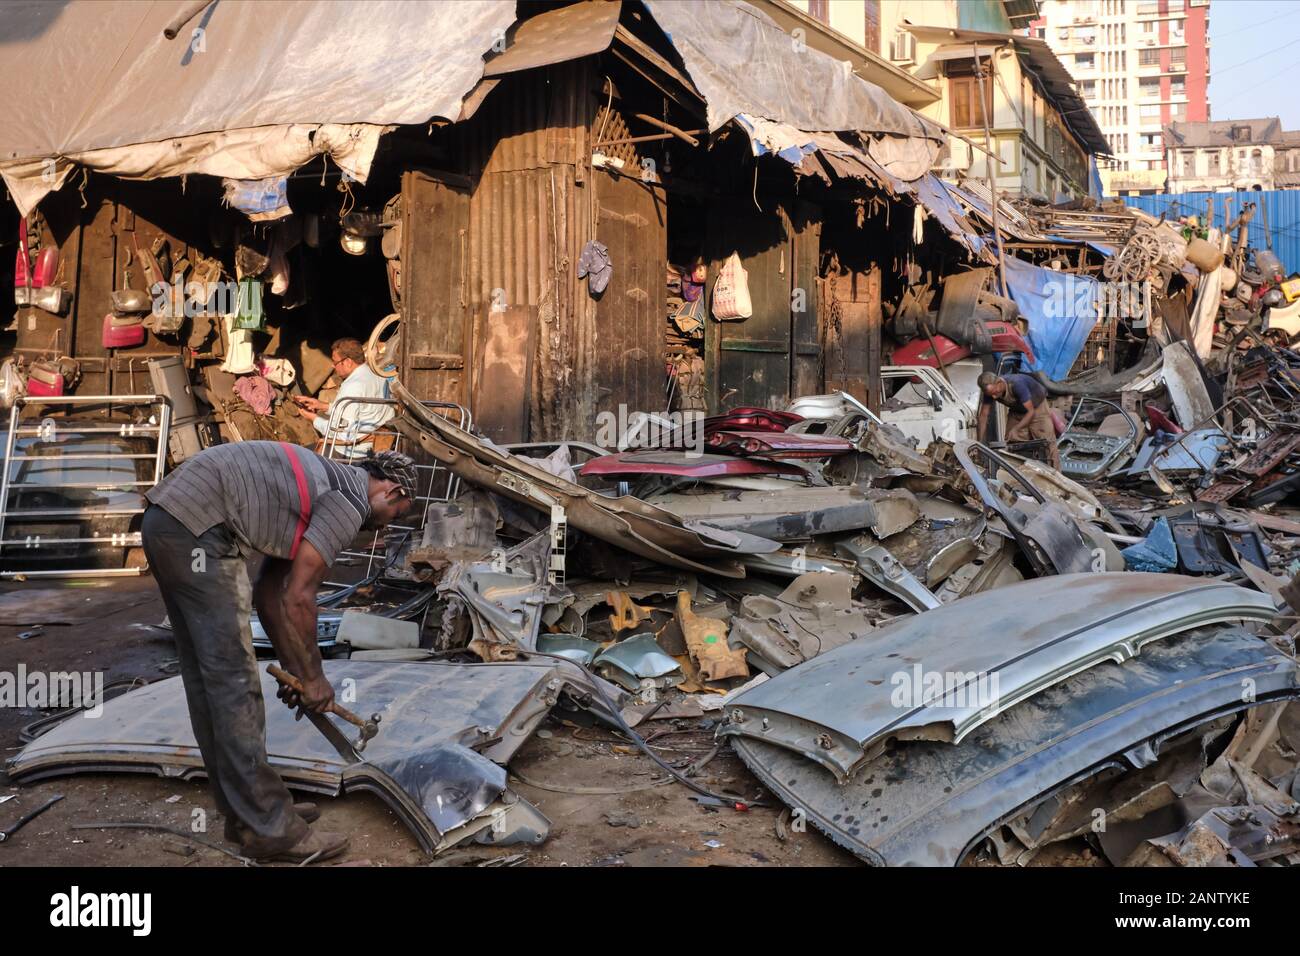 A worker taking apart parts of dismantled old cars at Thieves' Market (Chor Bazar) in Mumbai, India, anything re-usable to be sold Stock Photo